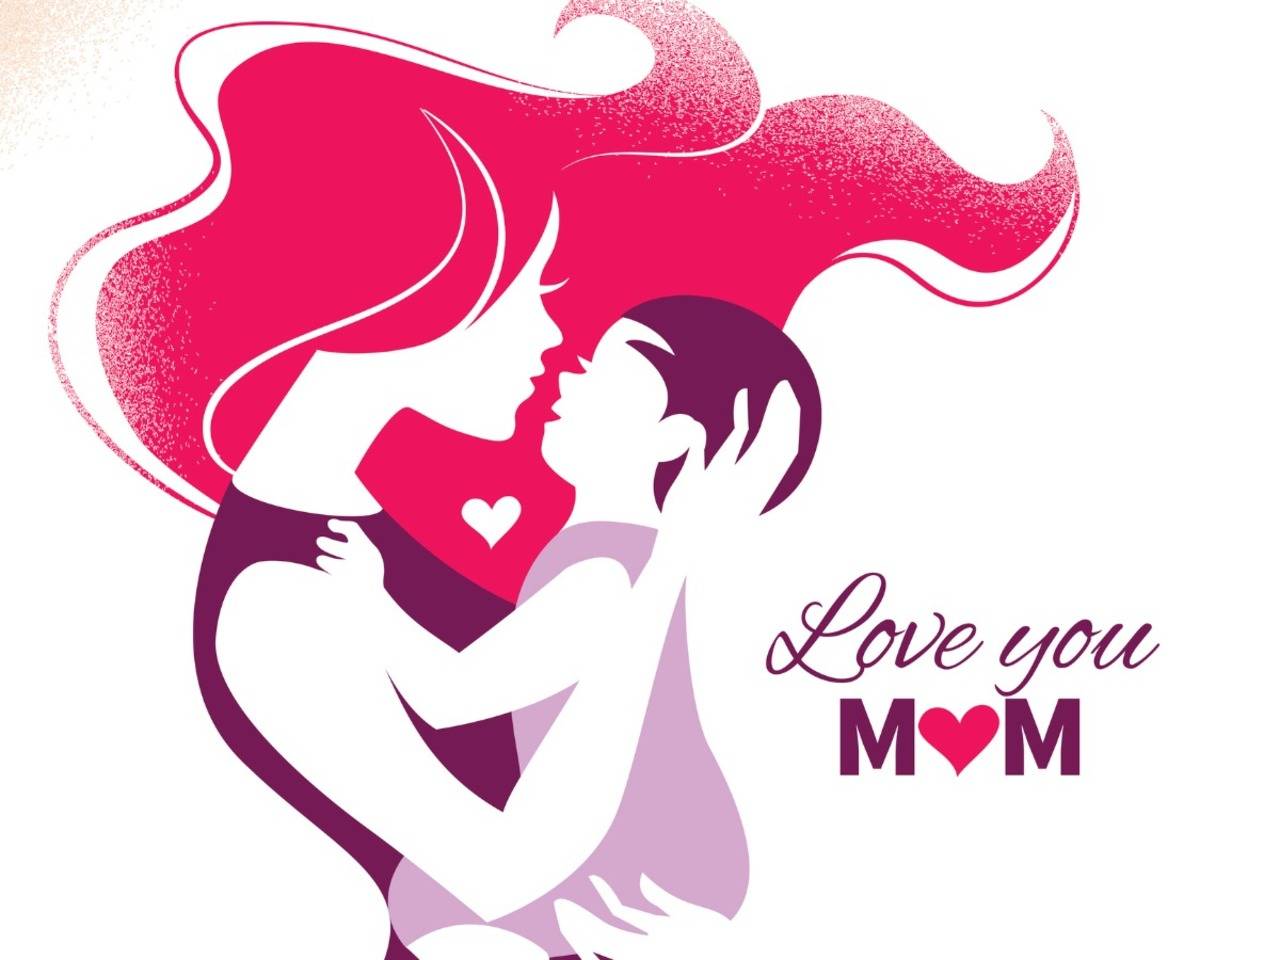 "An Incredible Collection of Full 4K Mother's Day Images for WhatsApp